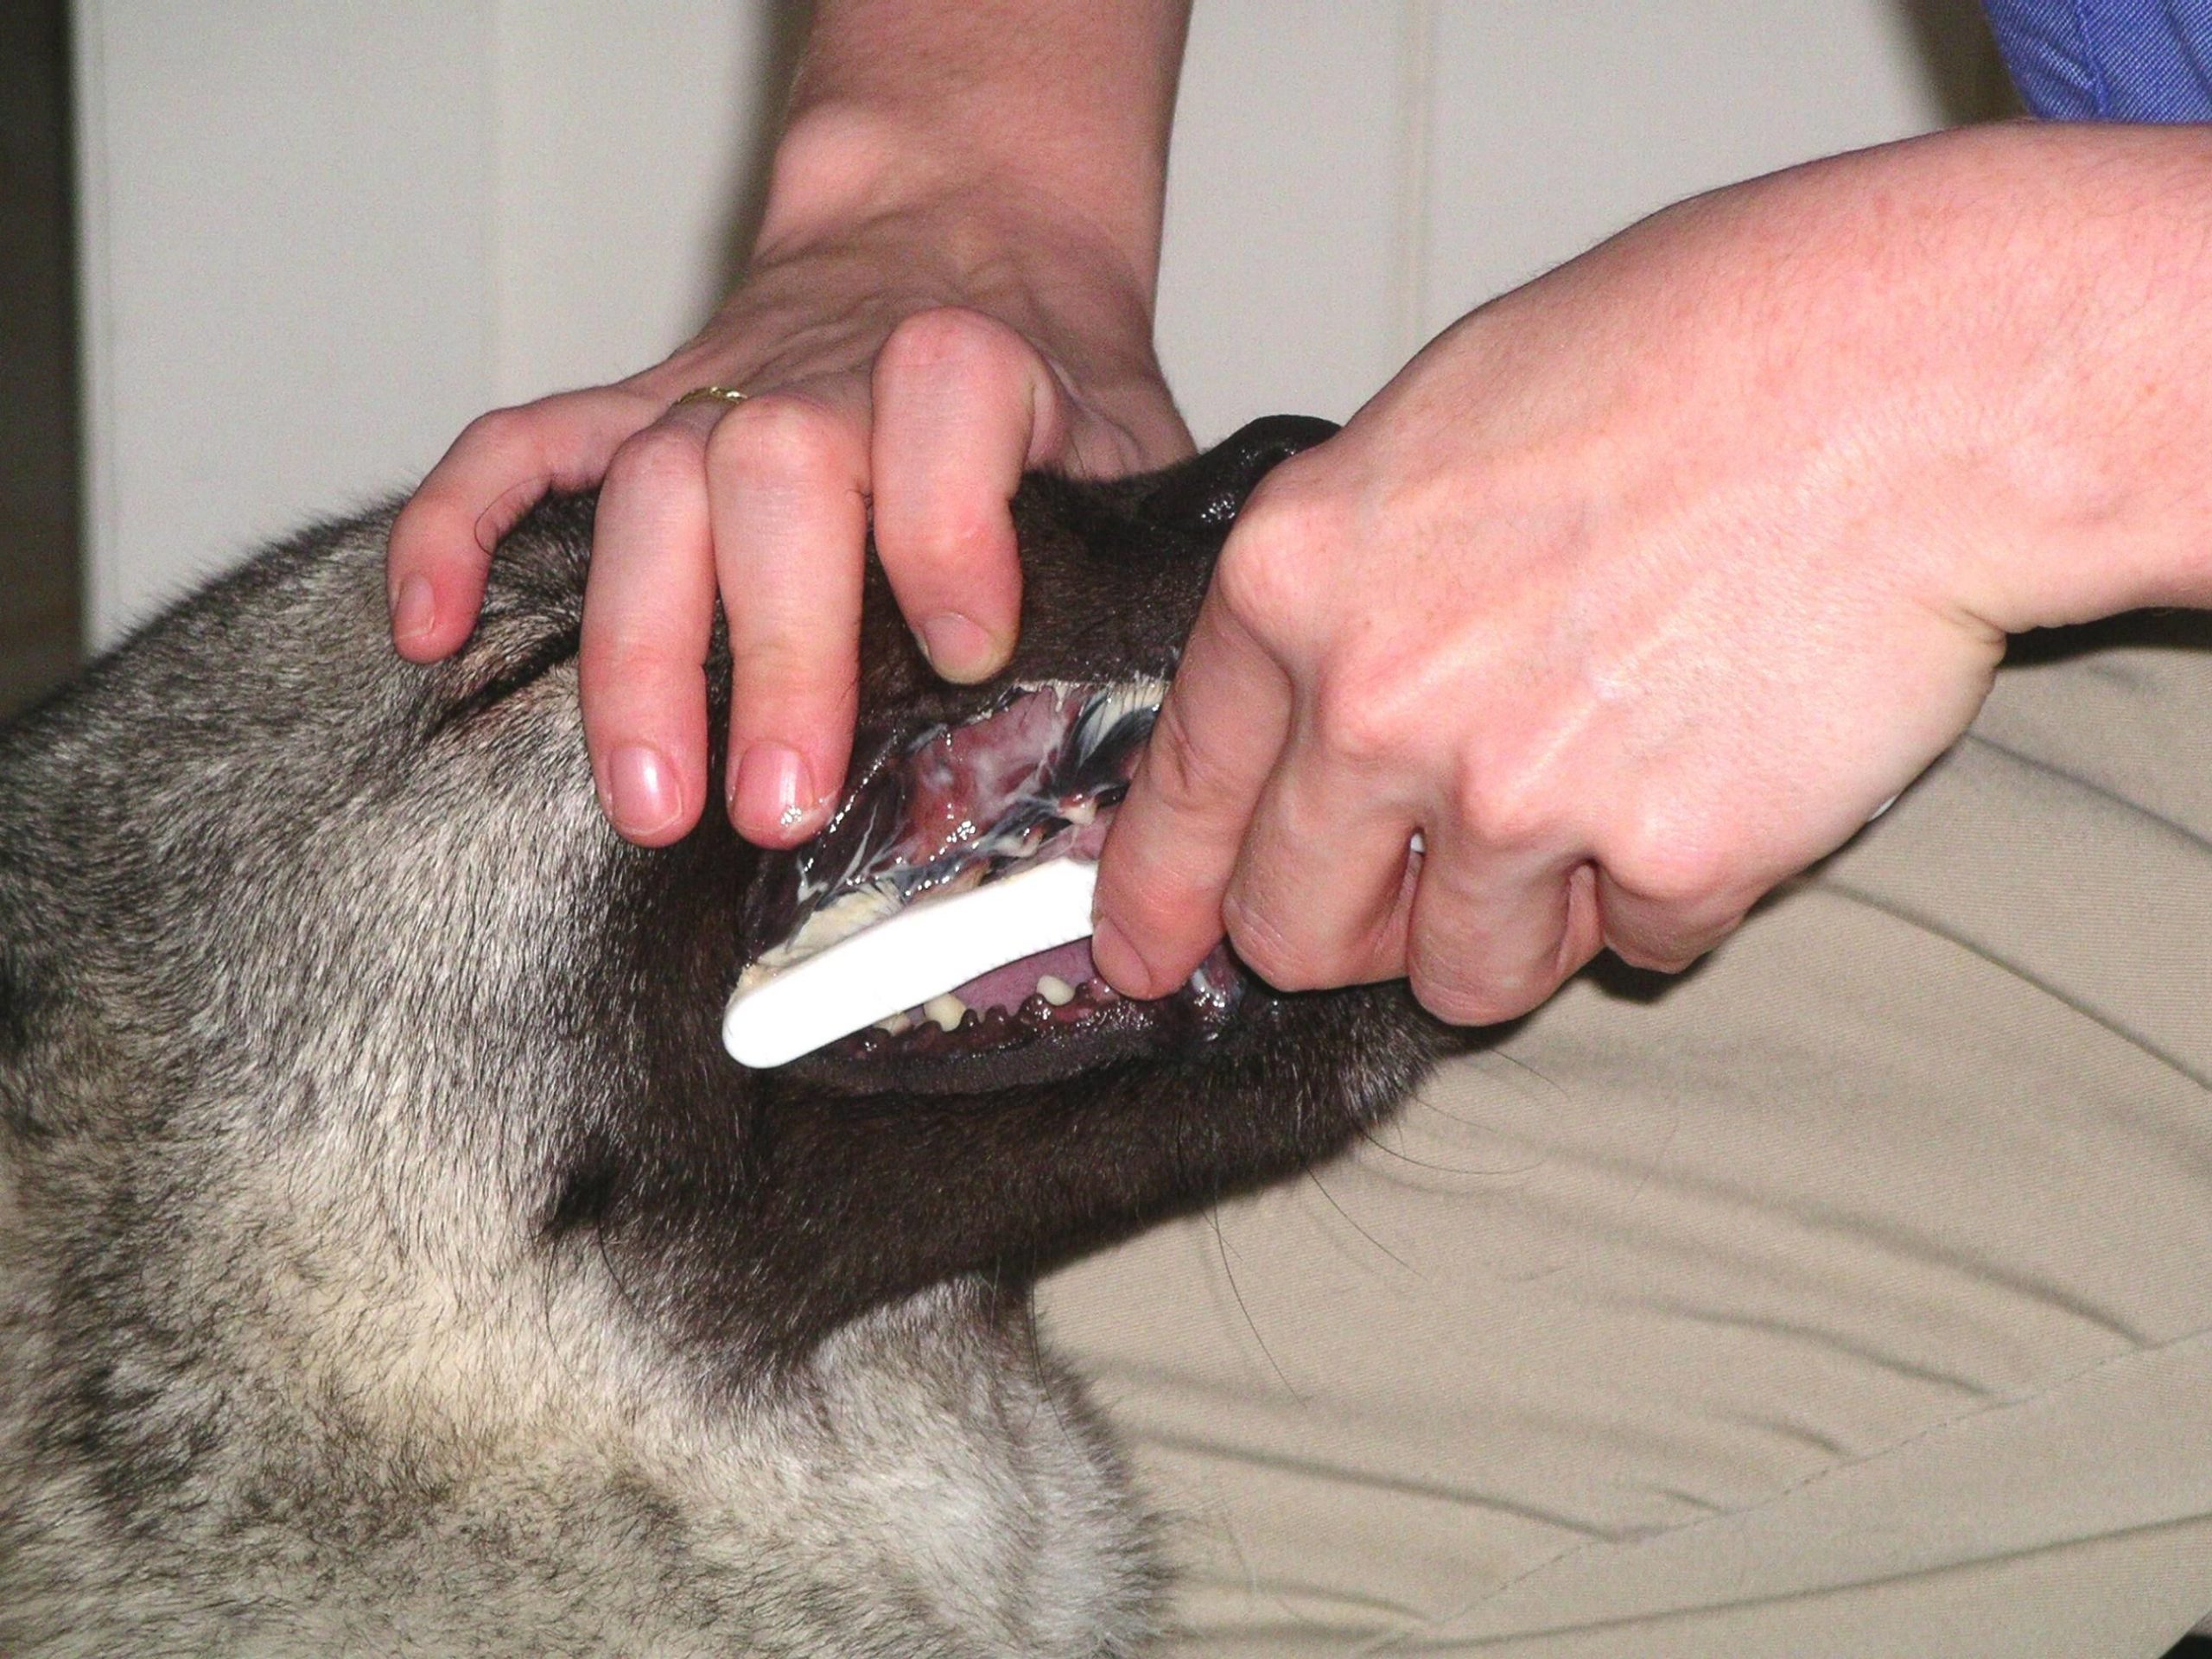 Brushing Your Dogs’s Teeth